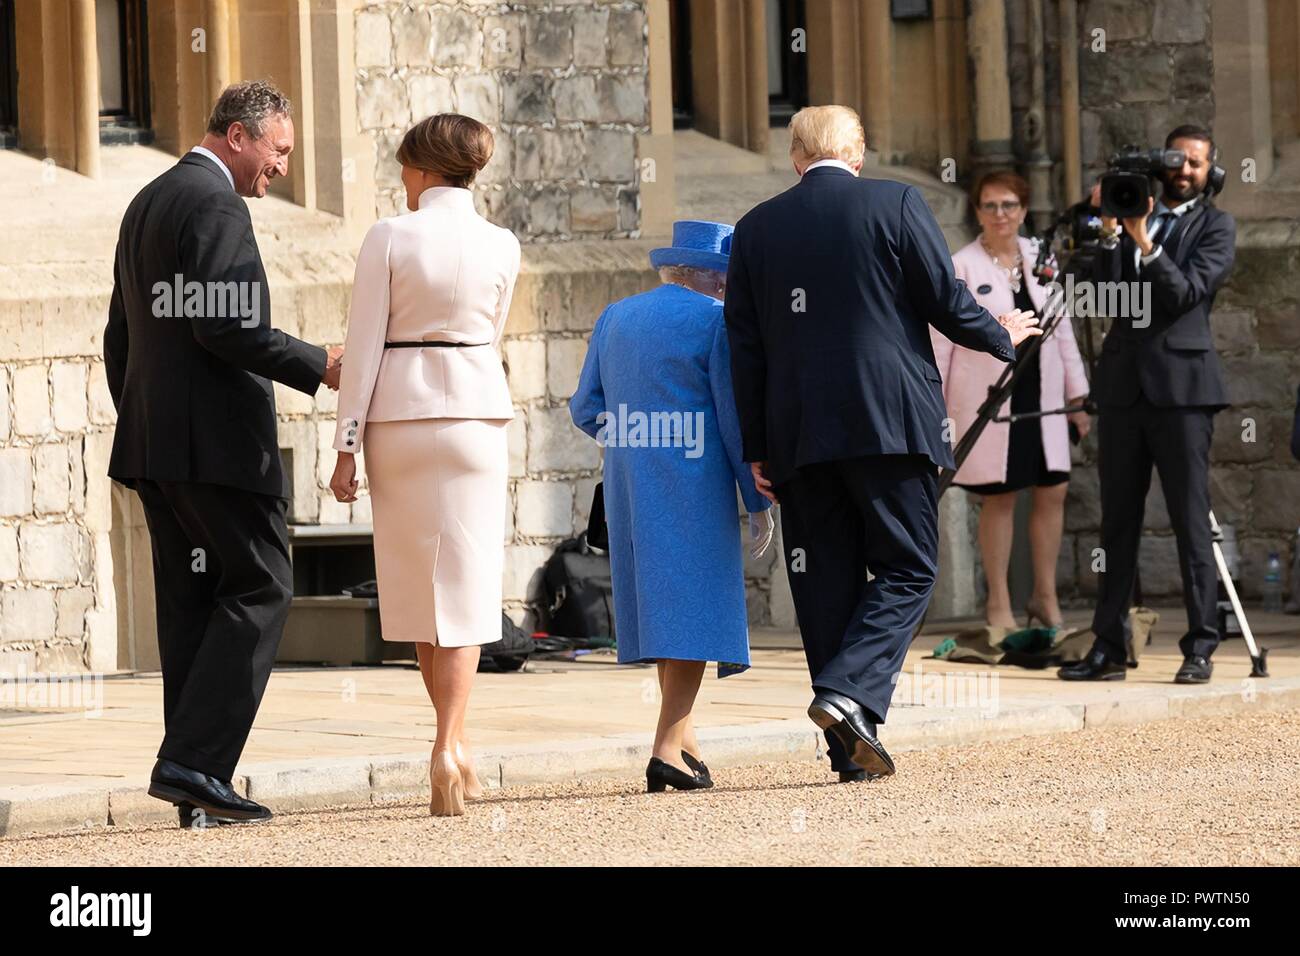 Her Majesty Queen Elizabeth II walks with U.S. President Donald Trump as First Lady Melania Trump follows behind at Windsor Castle July 13, 2018 in Windsor, United Kingdom. Stock Photo